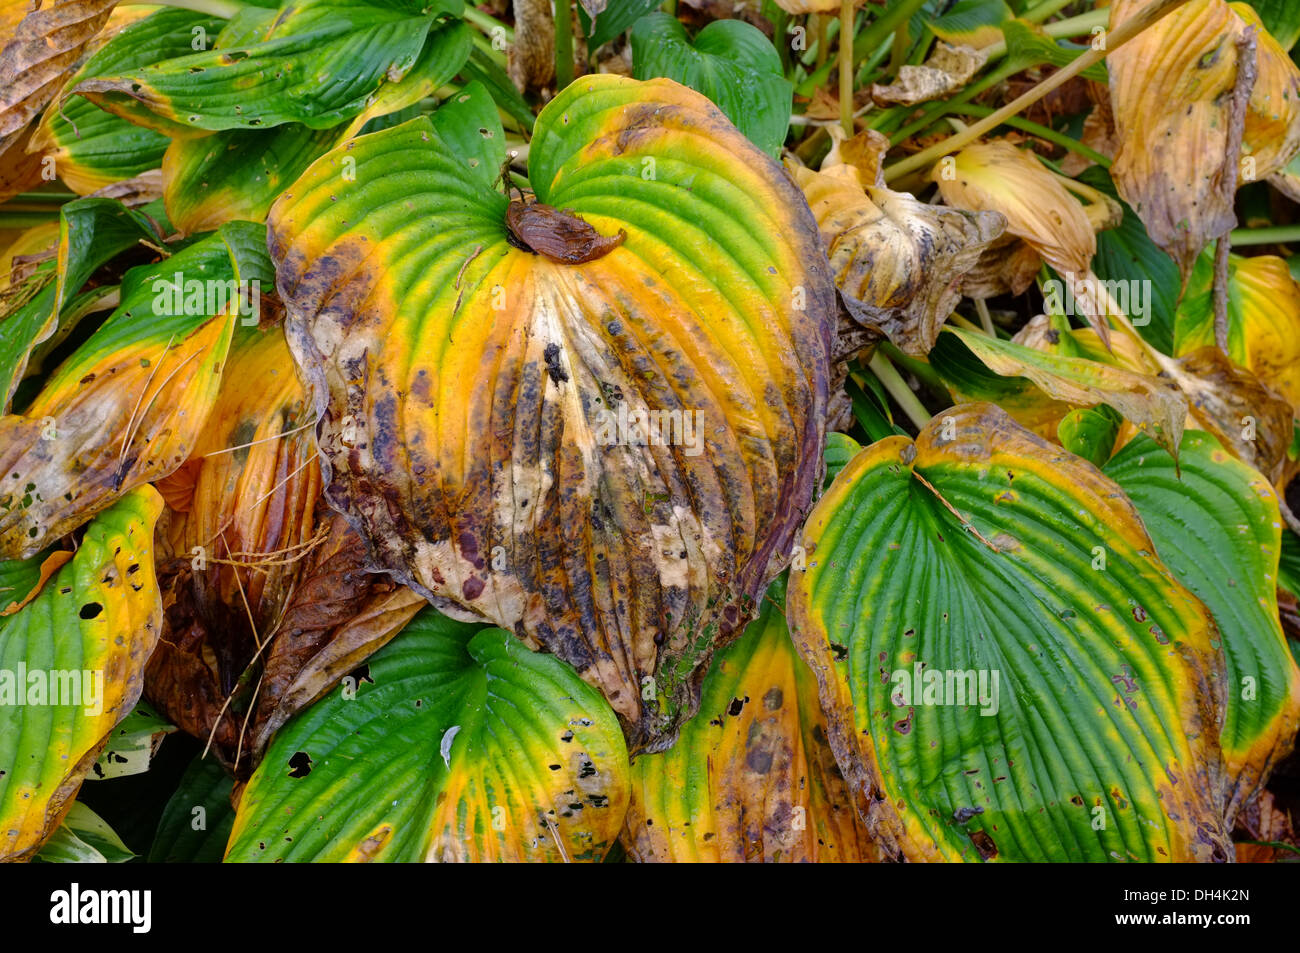 Hosta leaves showing autumn color change Stock Photo